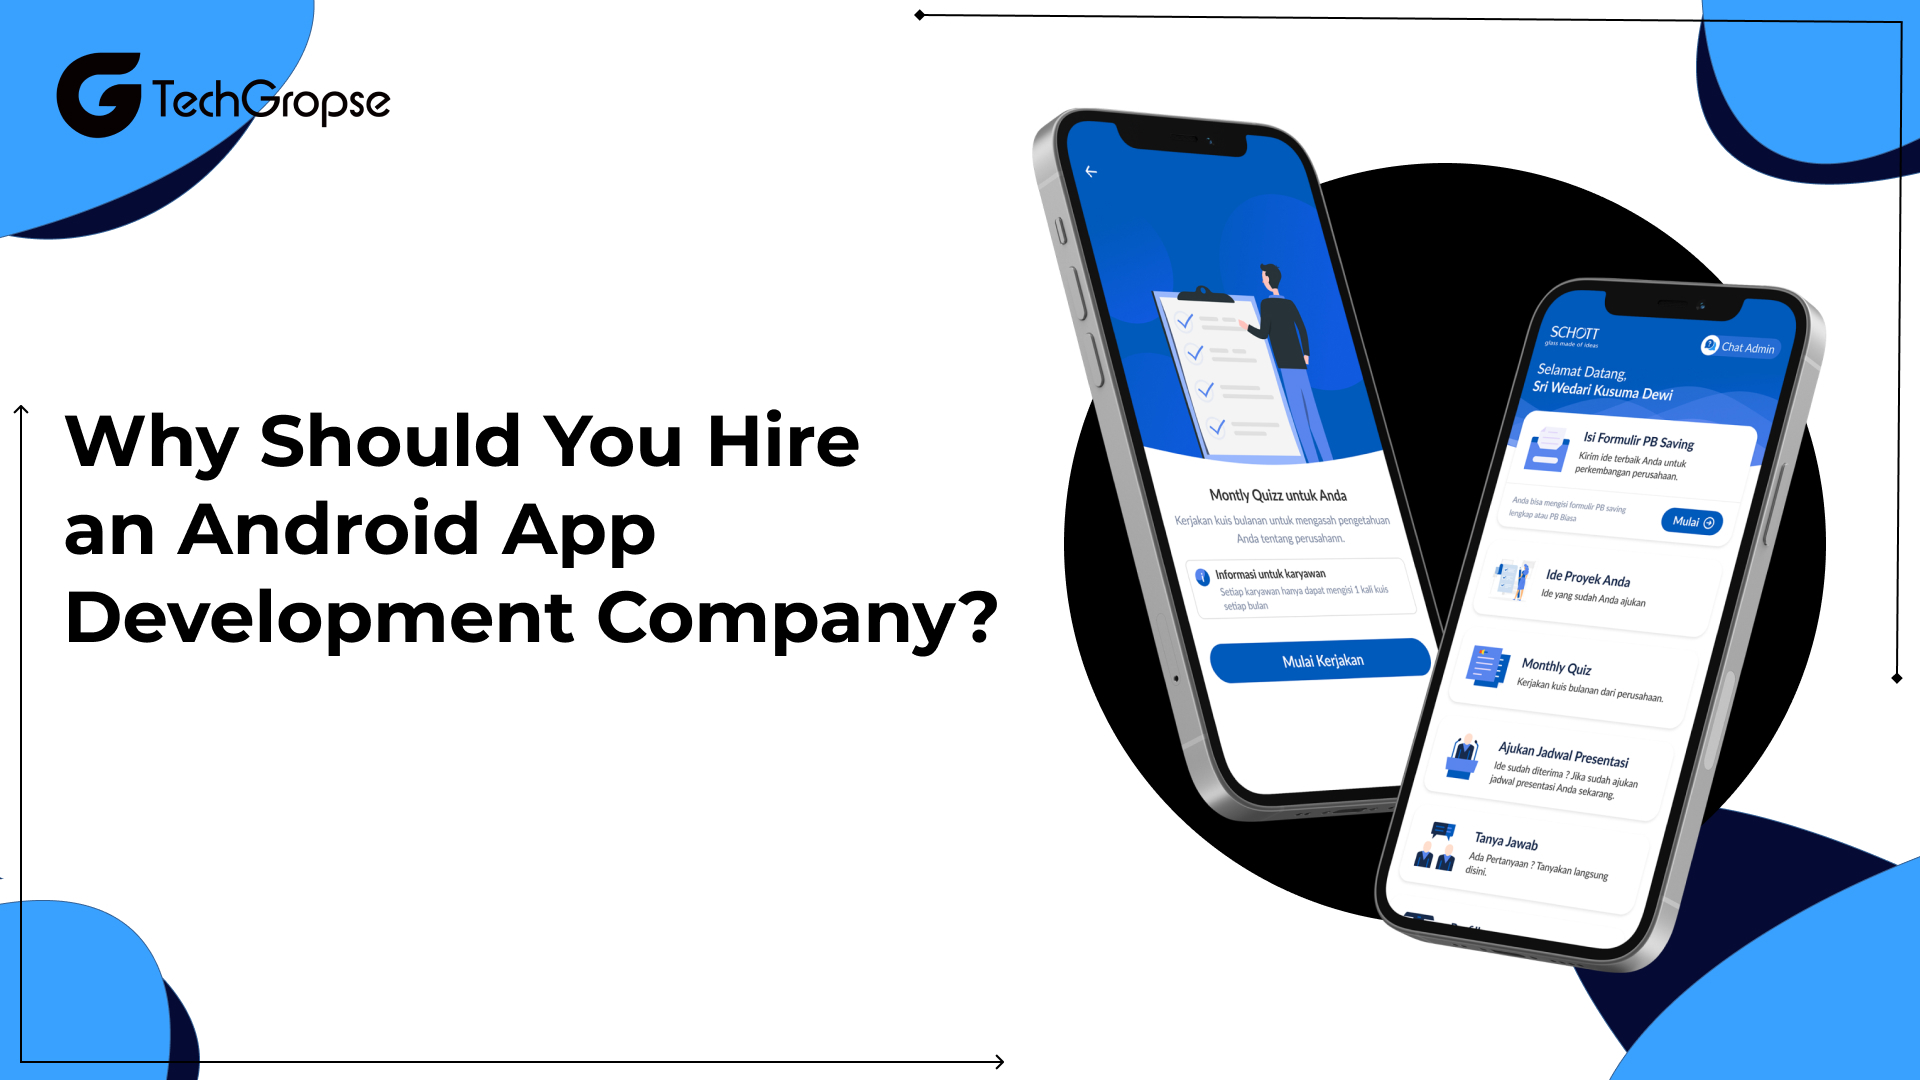 Why Should You Hire an Android App Development Company?